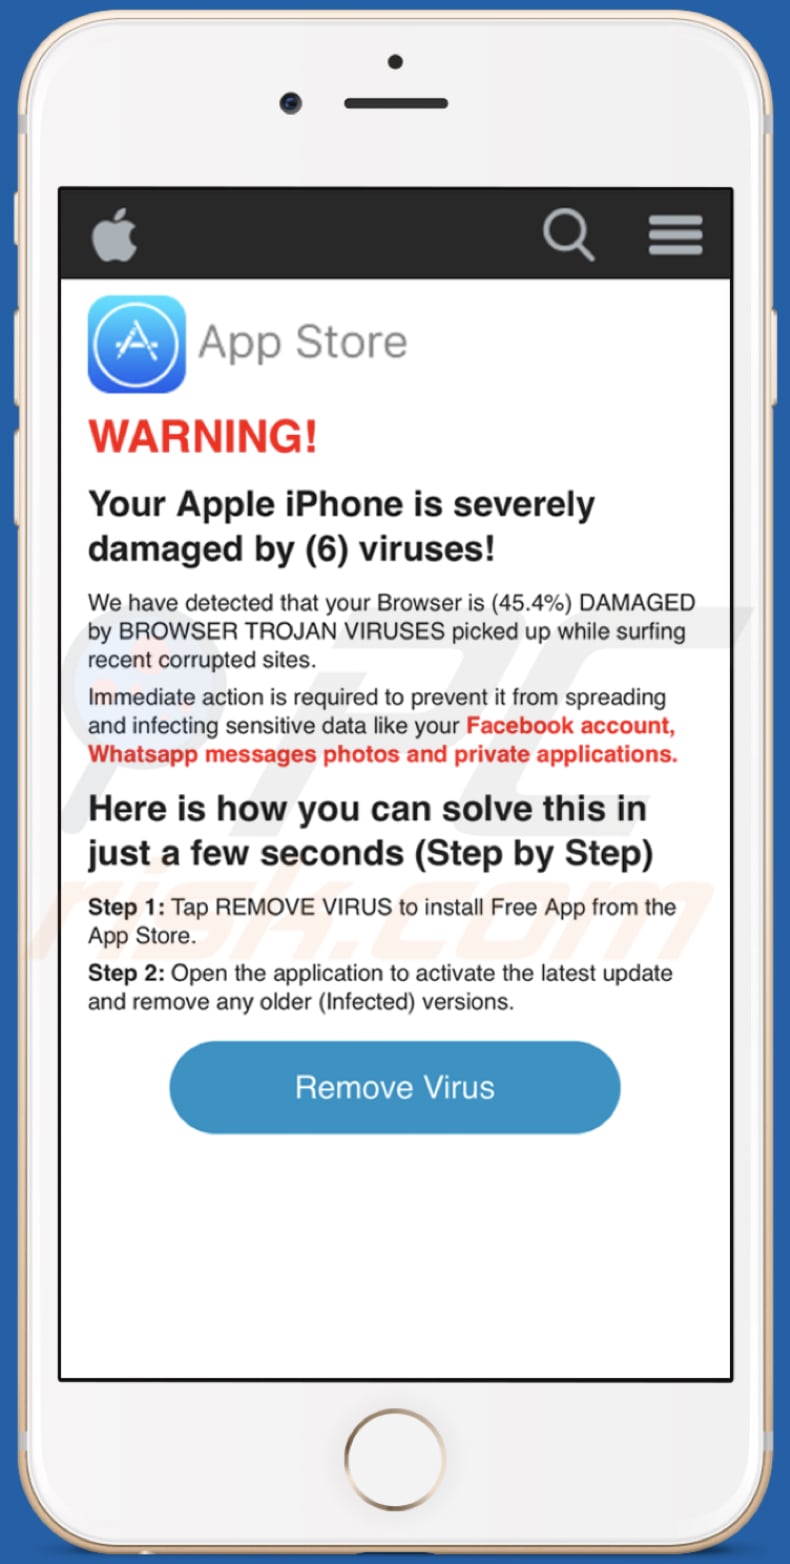 Your Apple iPhone is severely damaged by (6) viruses! scam